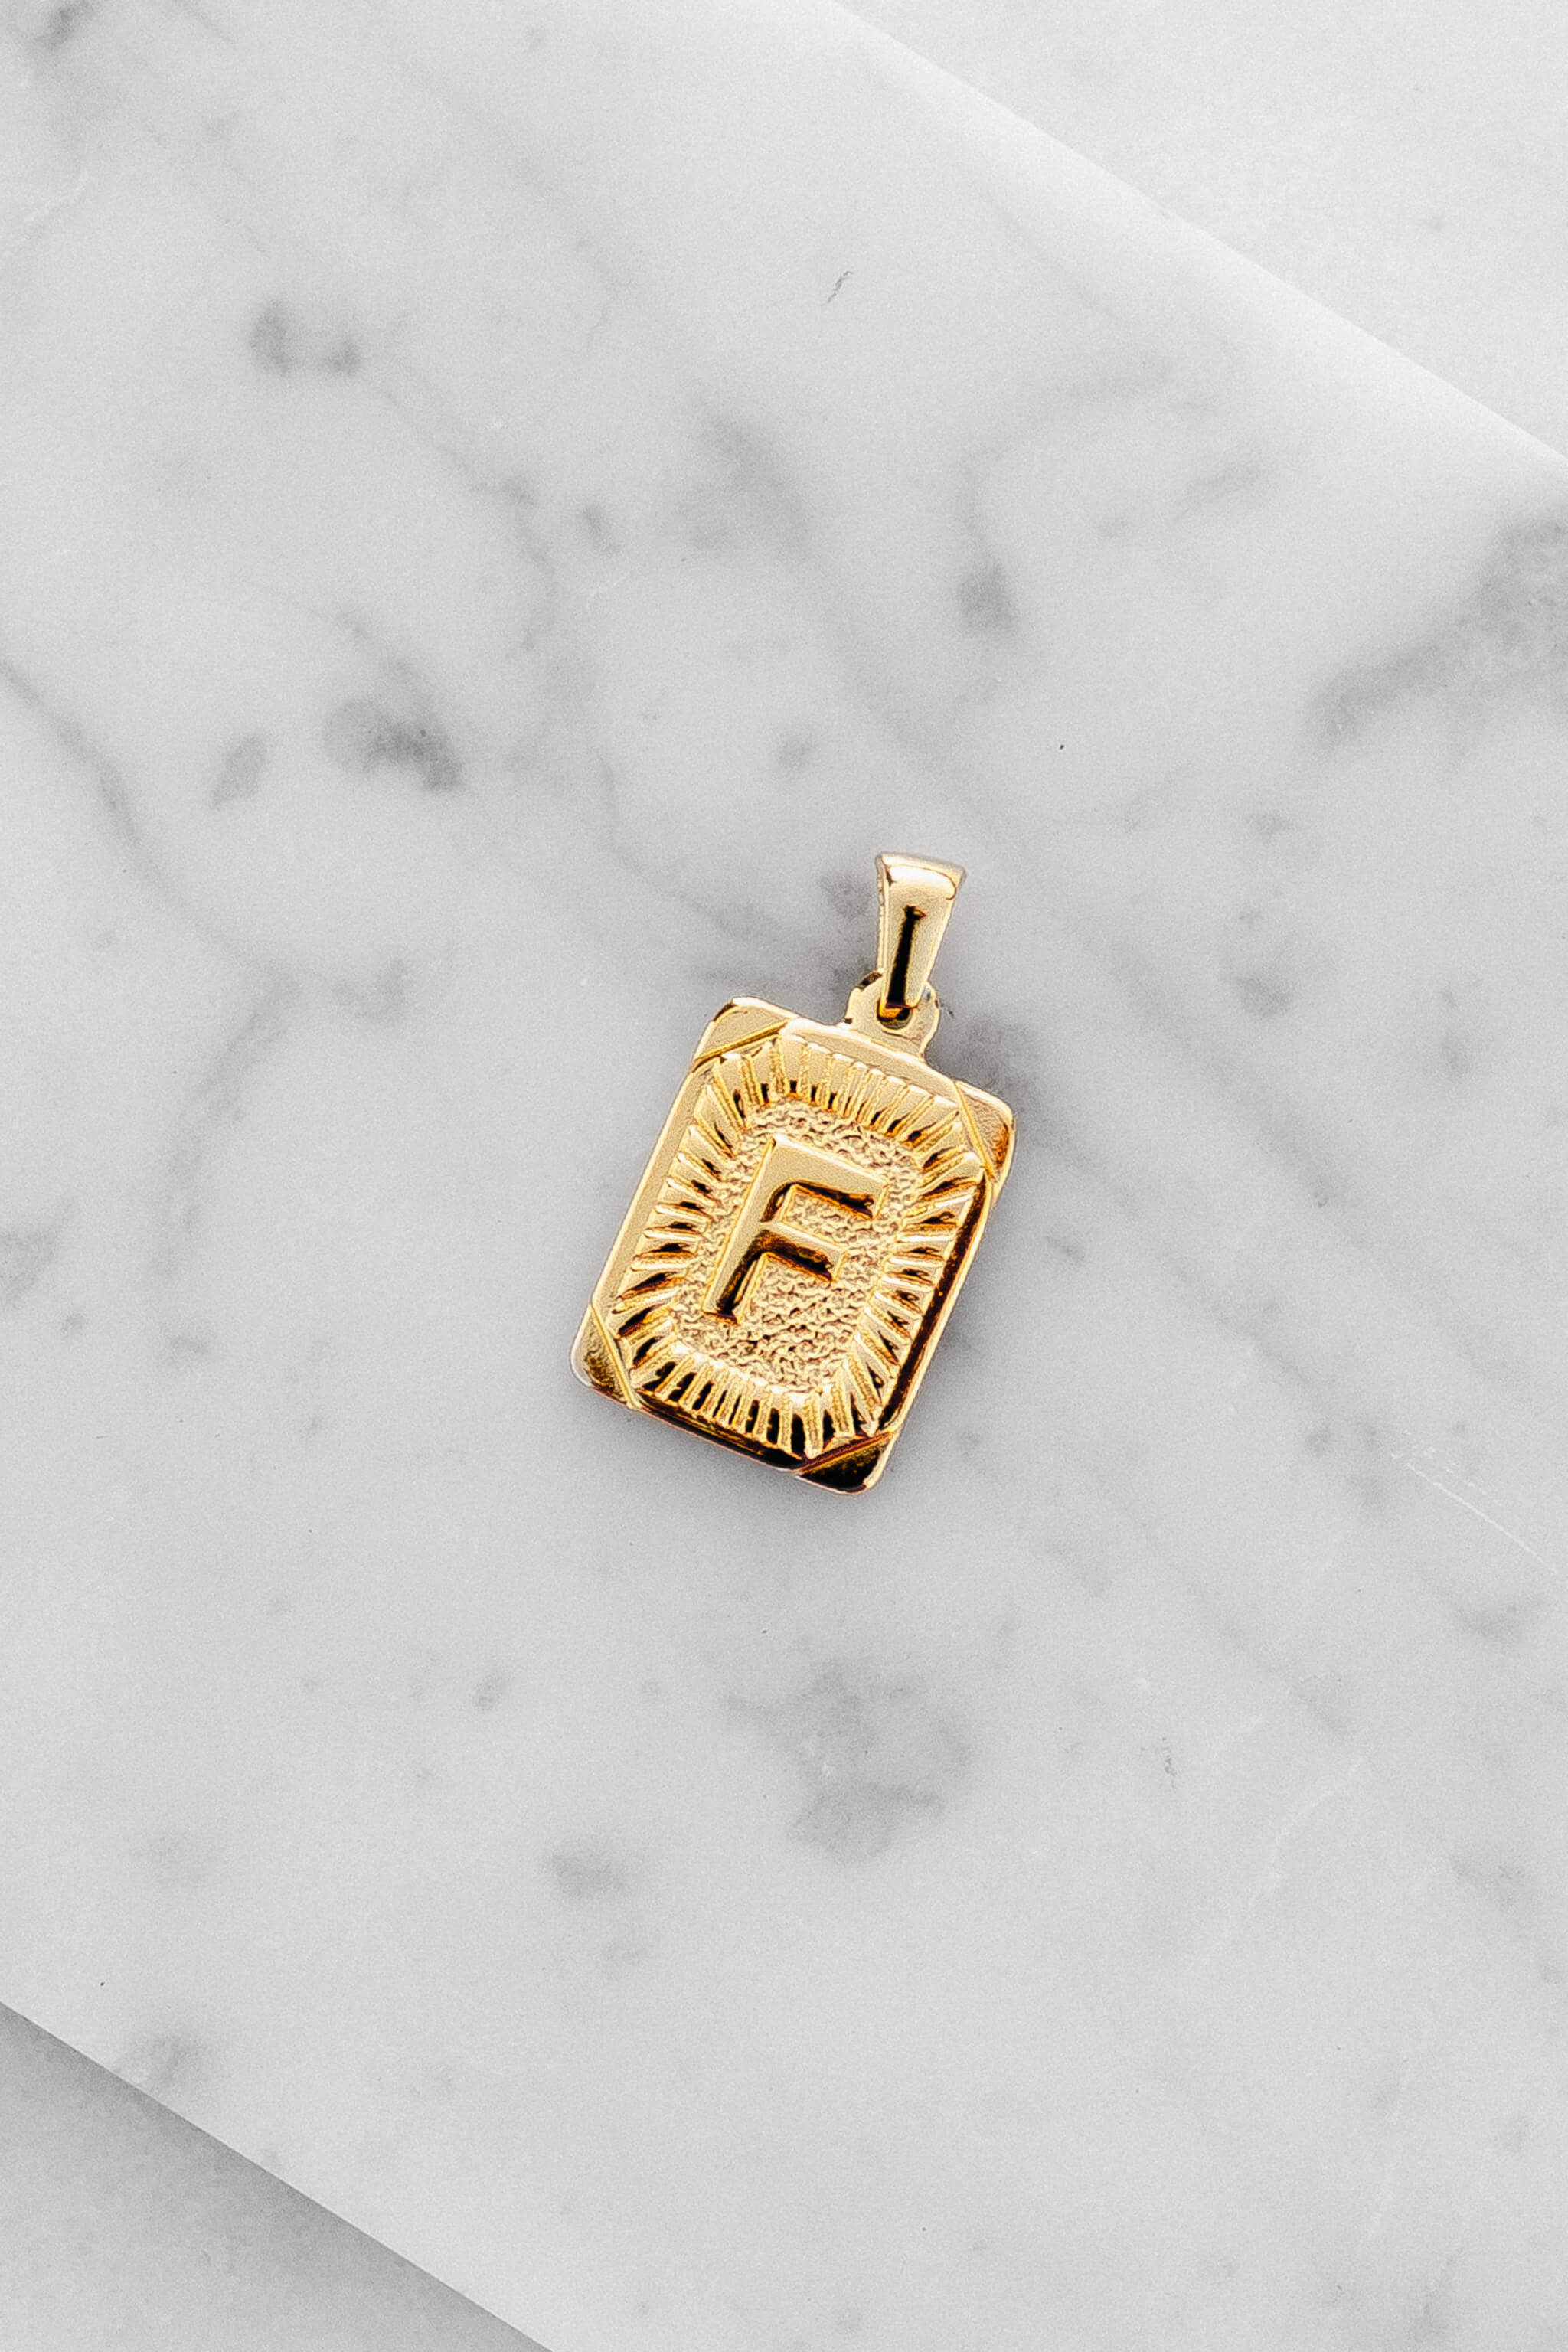 Gold Monogram Letter "F" Charm laying on a marble